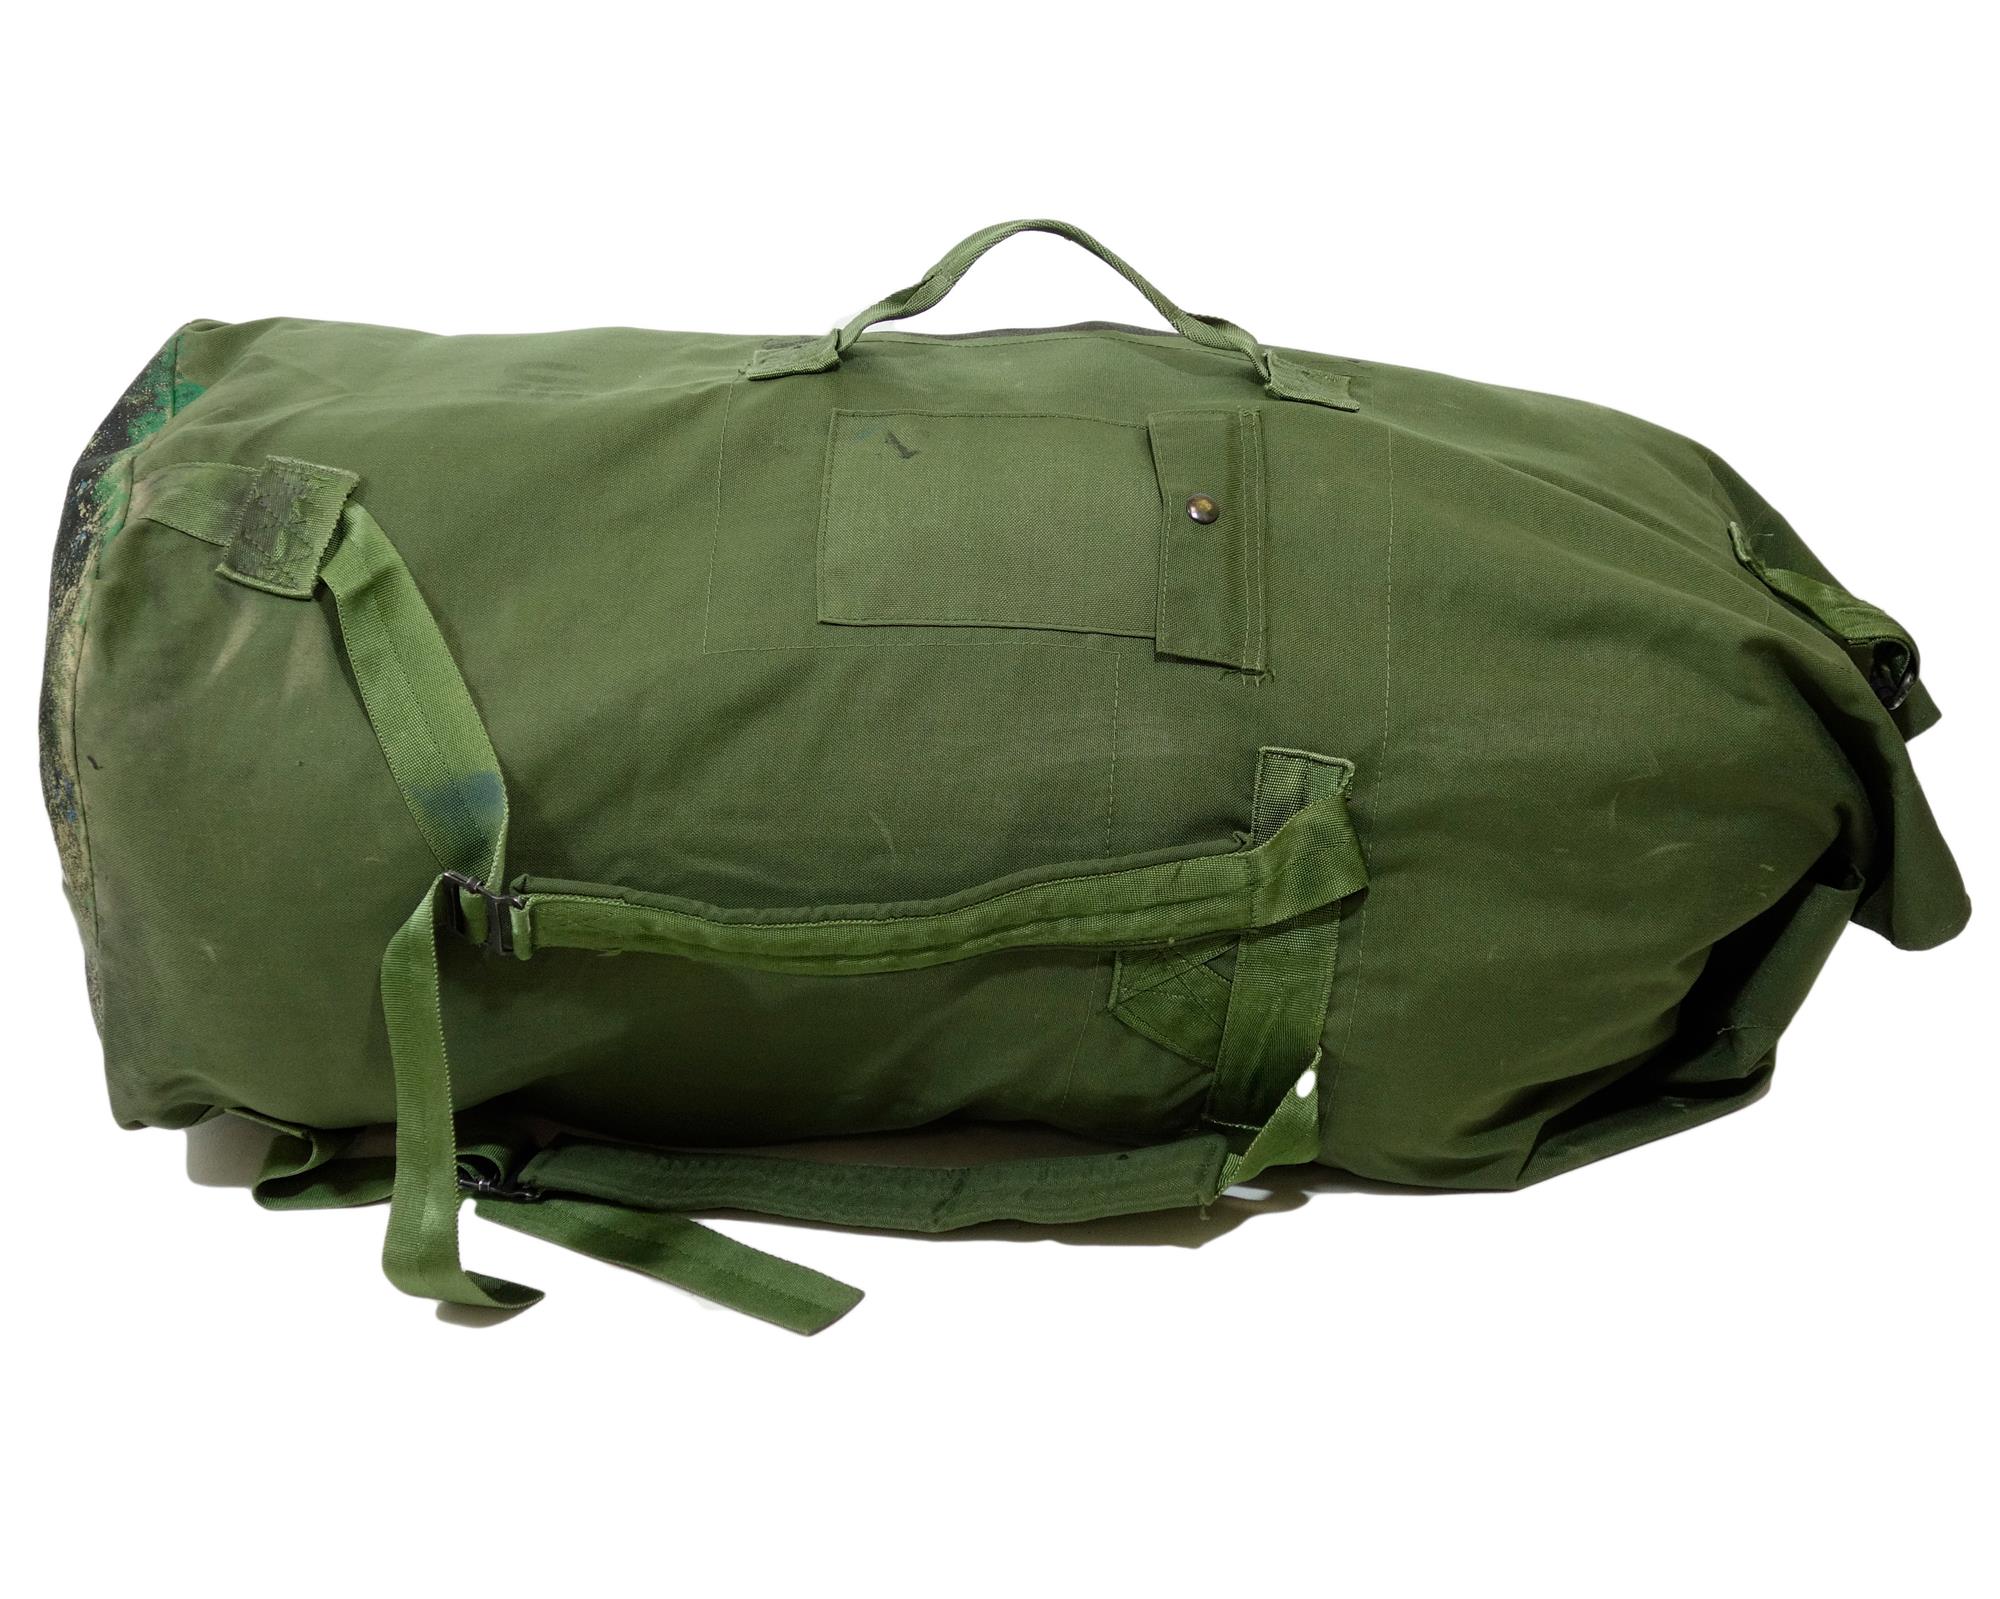 Shop Canvas Backpack Duffle Gear Bags - Fatigues Army Navy